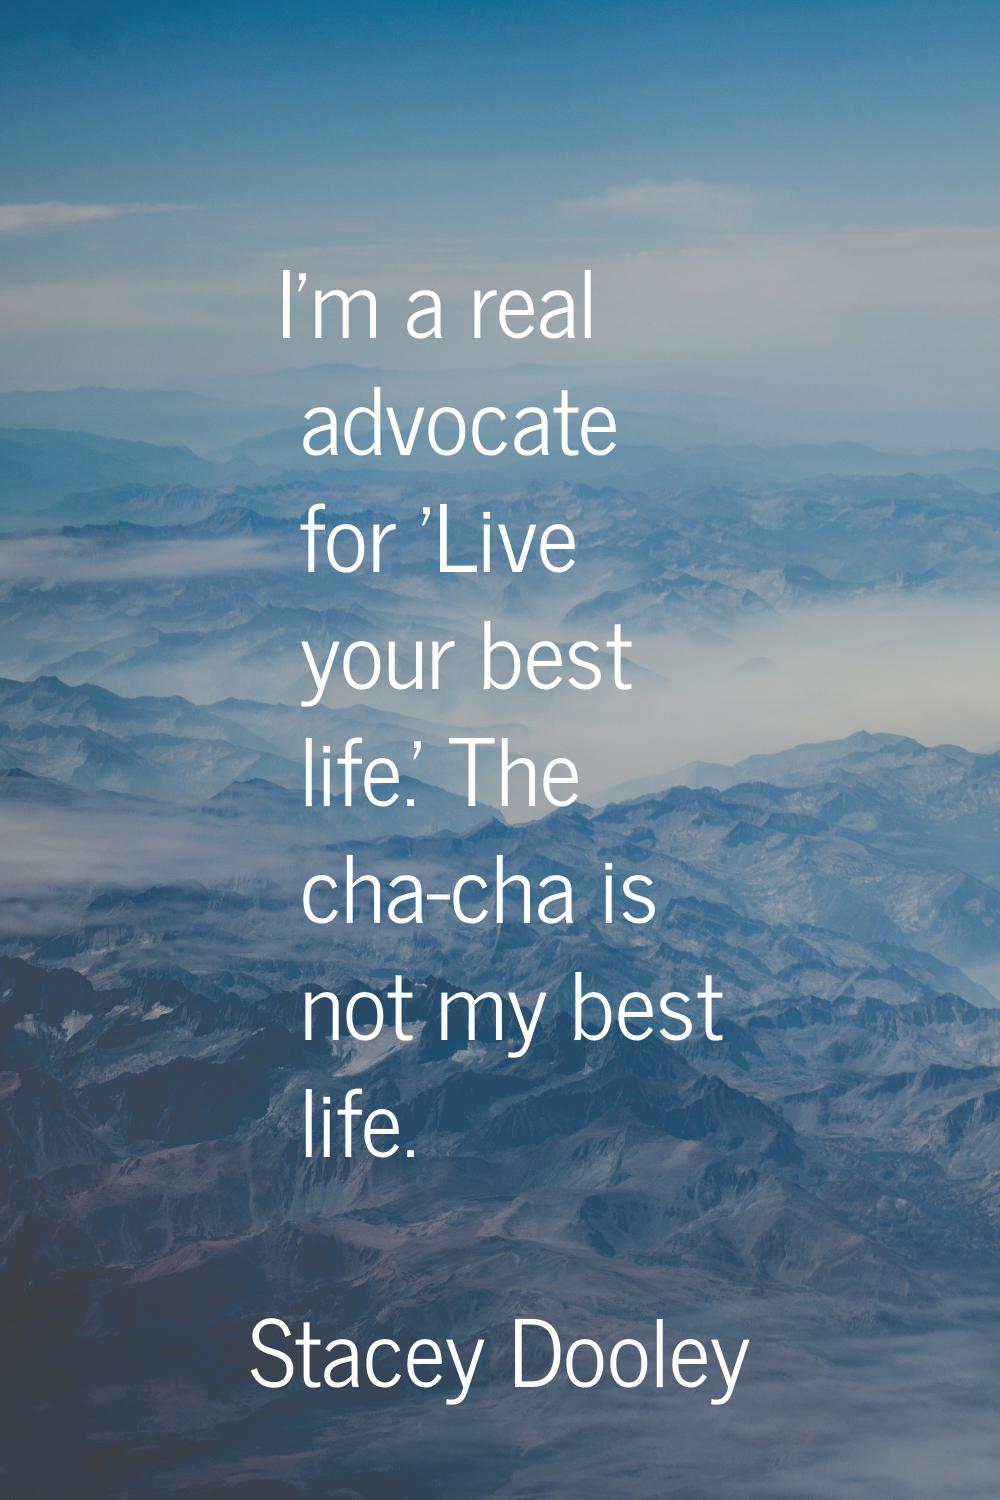 I'm a real advocate for 'Live your best life.' The cha-cha is not my best life.